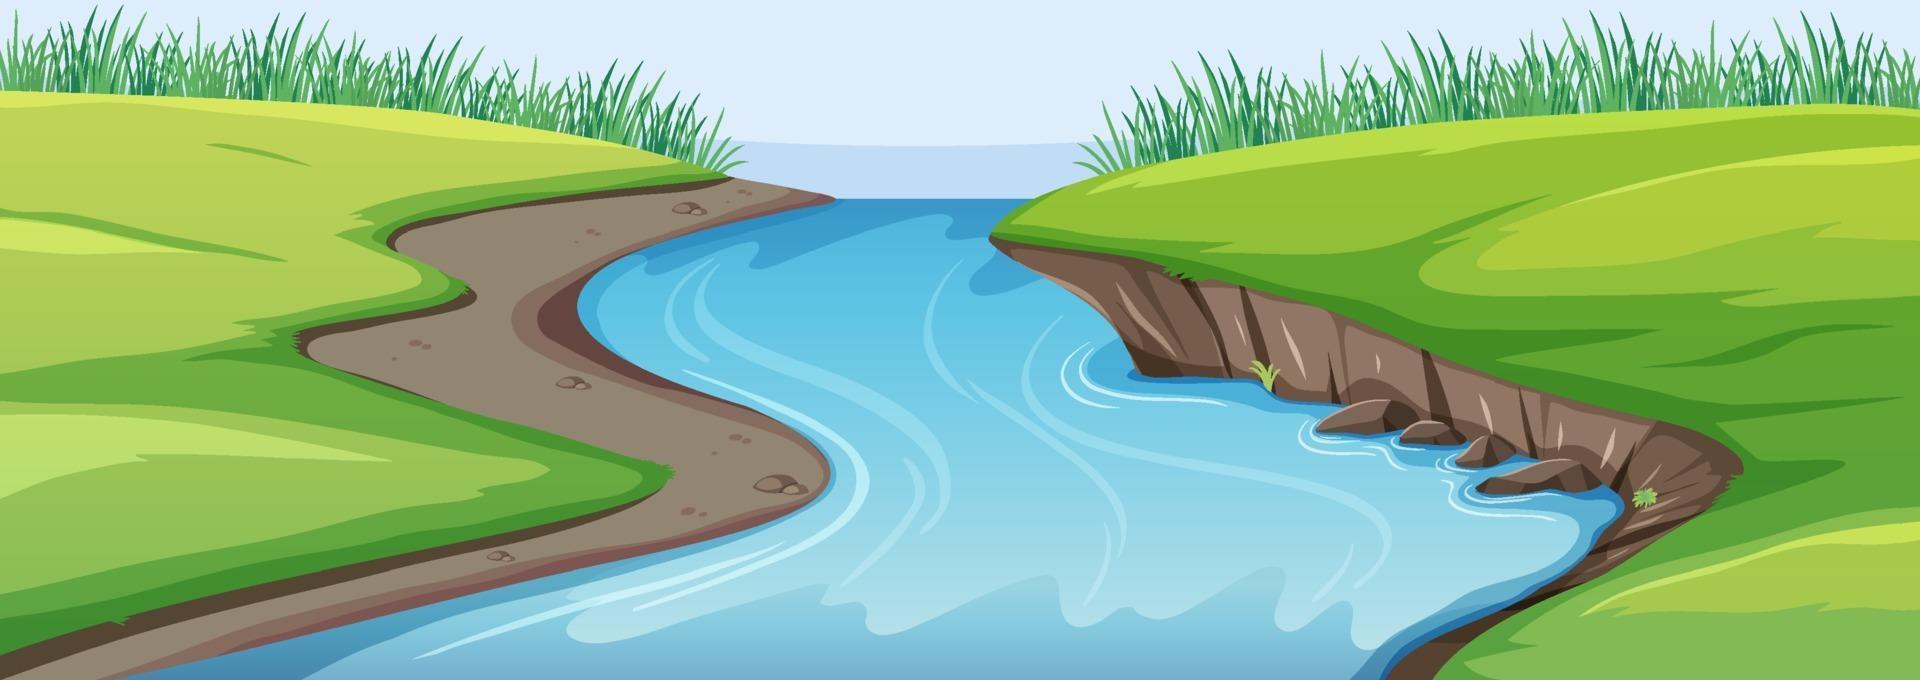 Nature scene with river and meadow vector